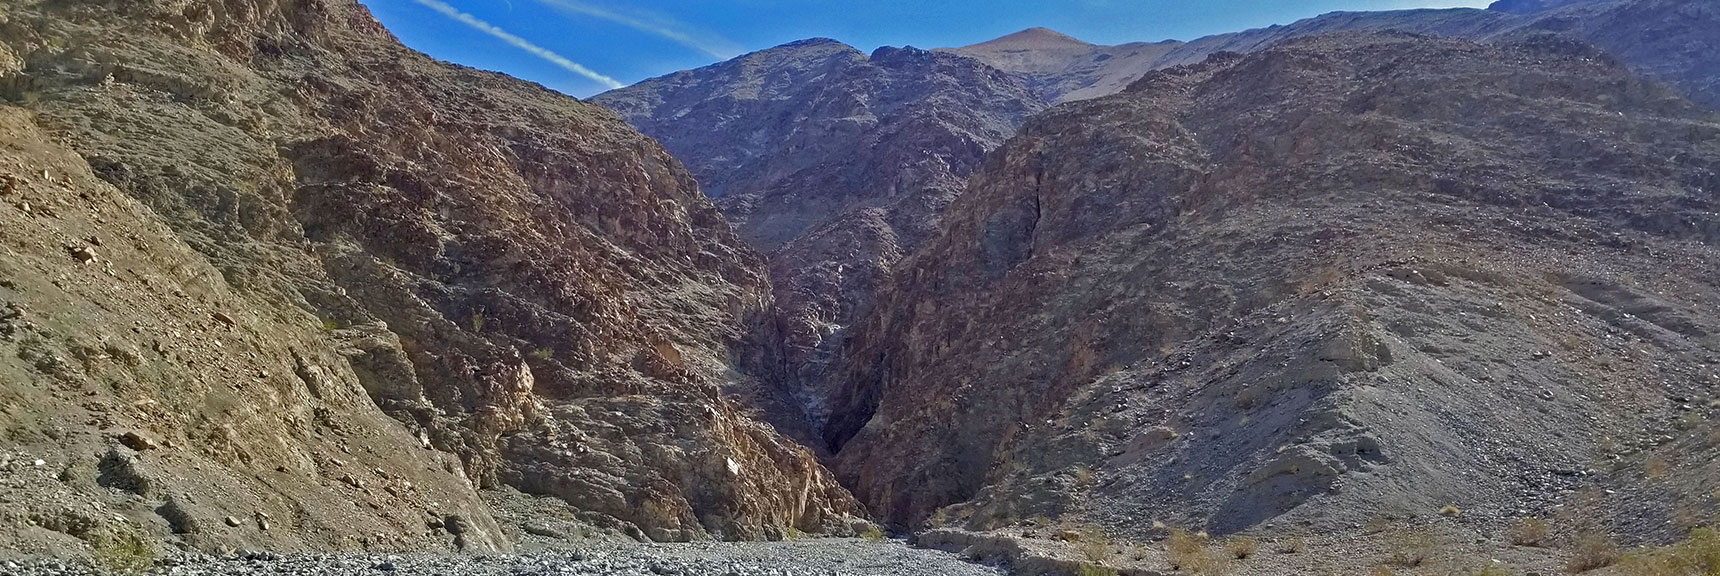 Entrance to Final 1/8th Mile of Canyon and Willow Spring | Willow Canyon | Death Valley National Park, California